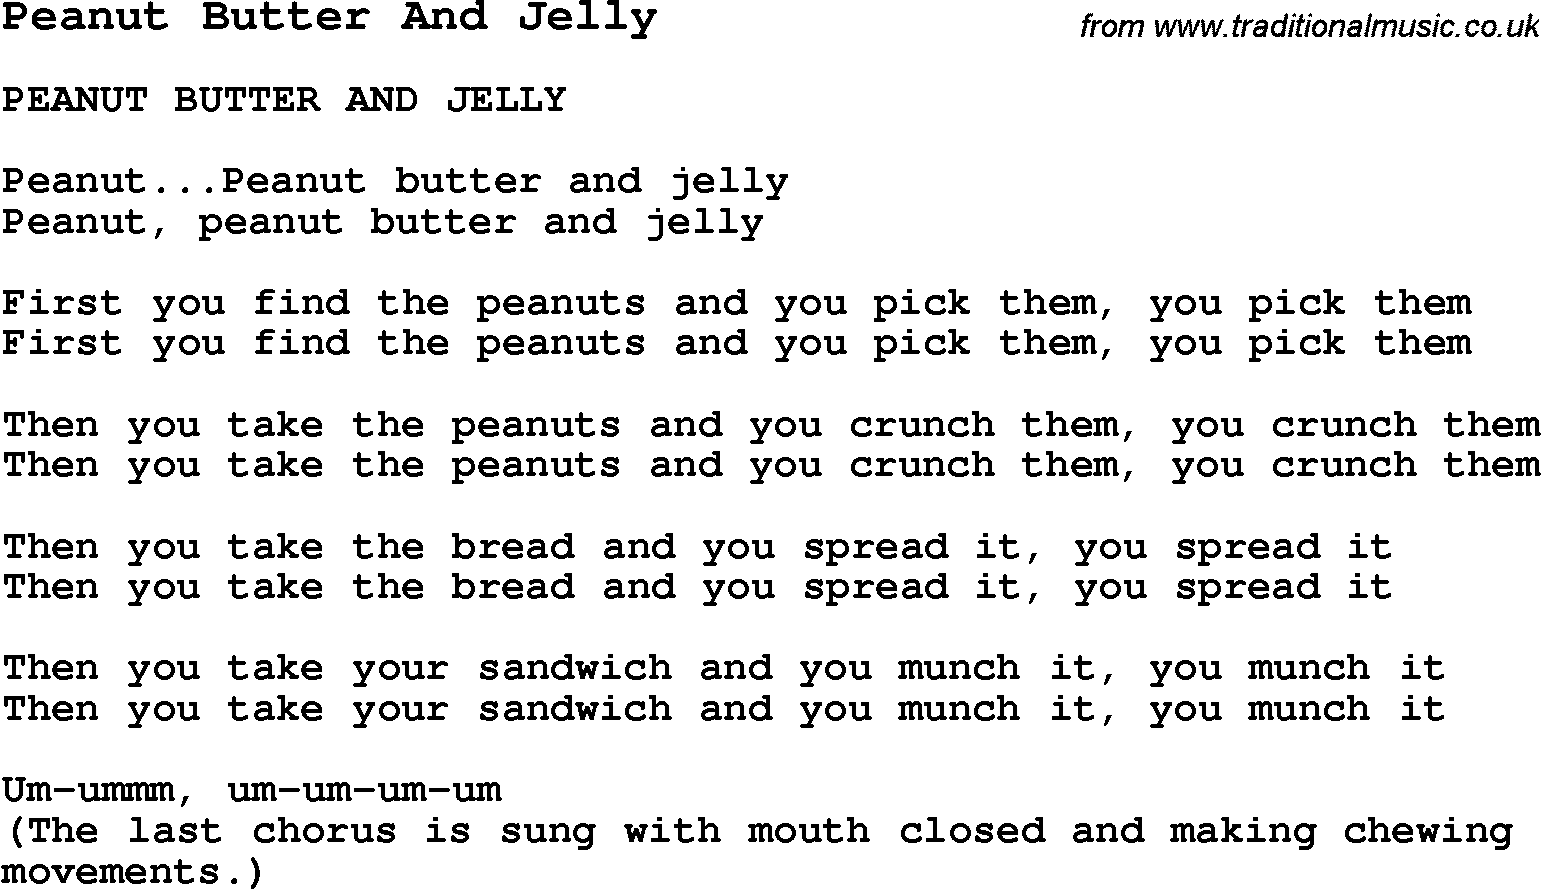 Summer-Camp Song, Peanut Butter And Jelly, with lyrics and chords for Ukulele, Guitar Banjo etc.